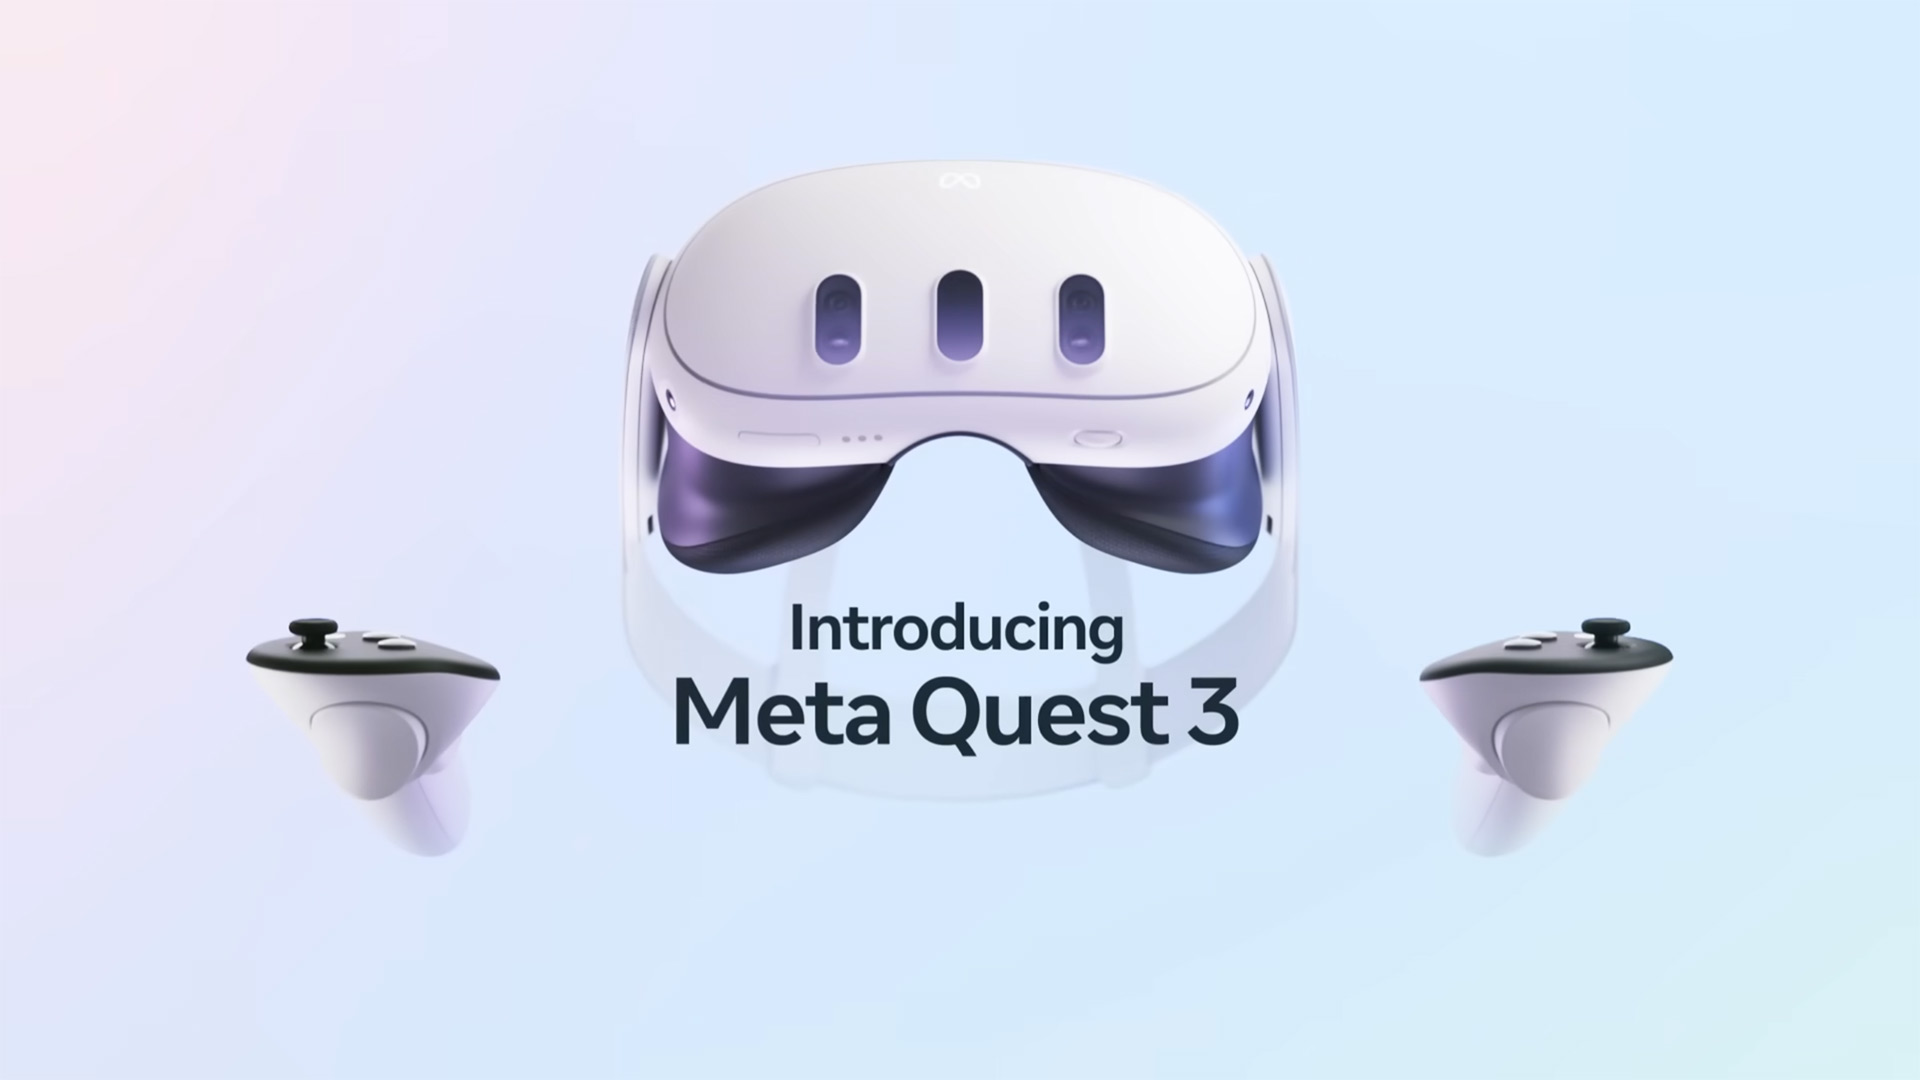 Meta Quest 3 is set to ship this fall